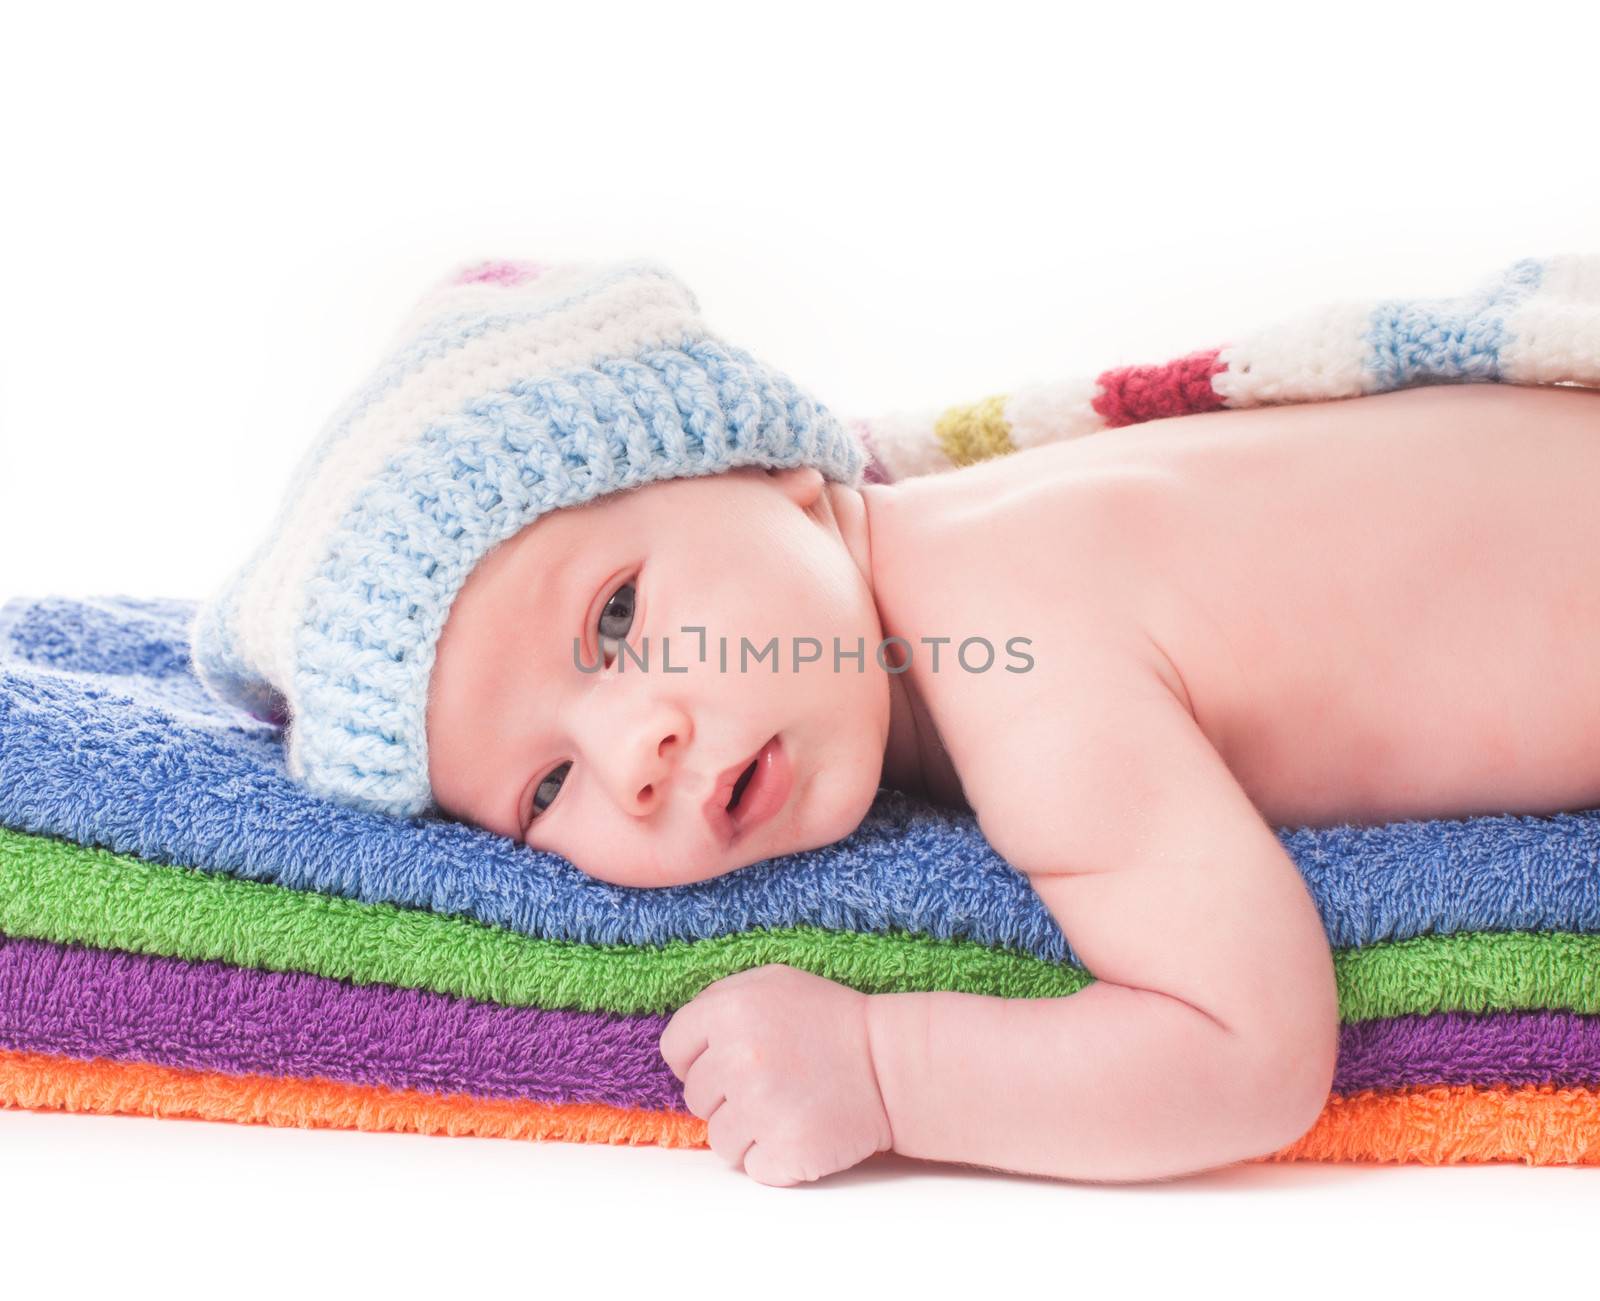 Baby on the color 
towels in crochet hat close up